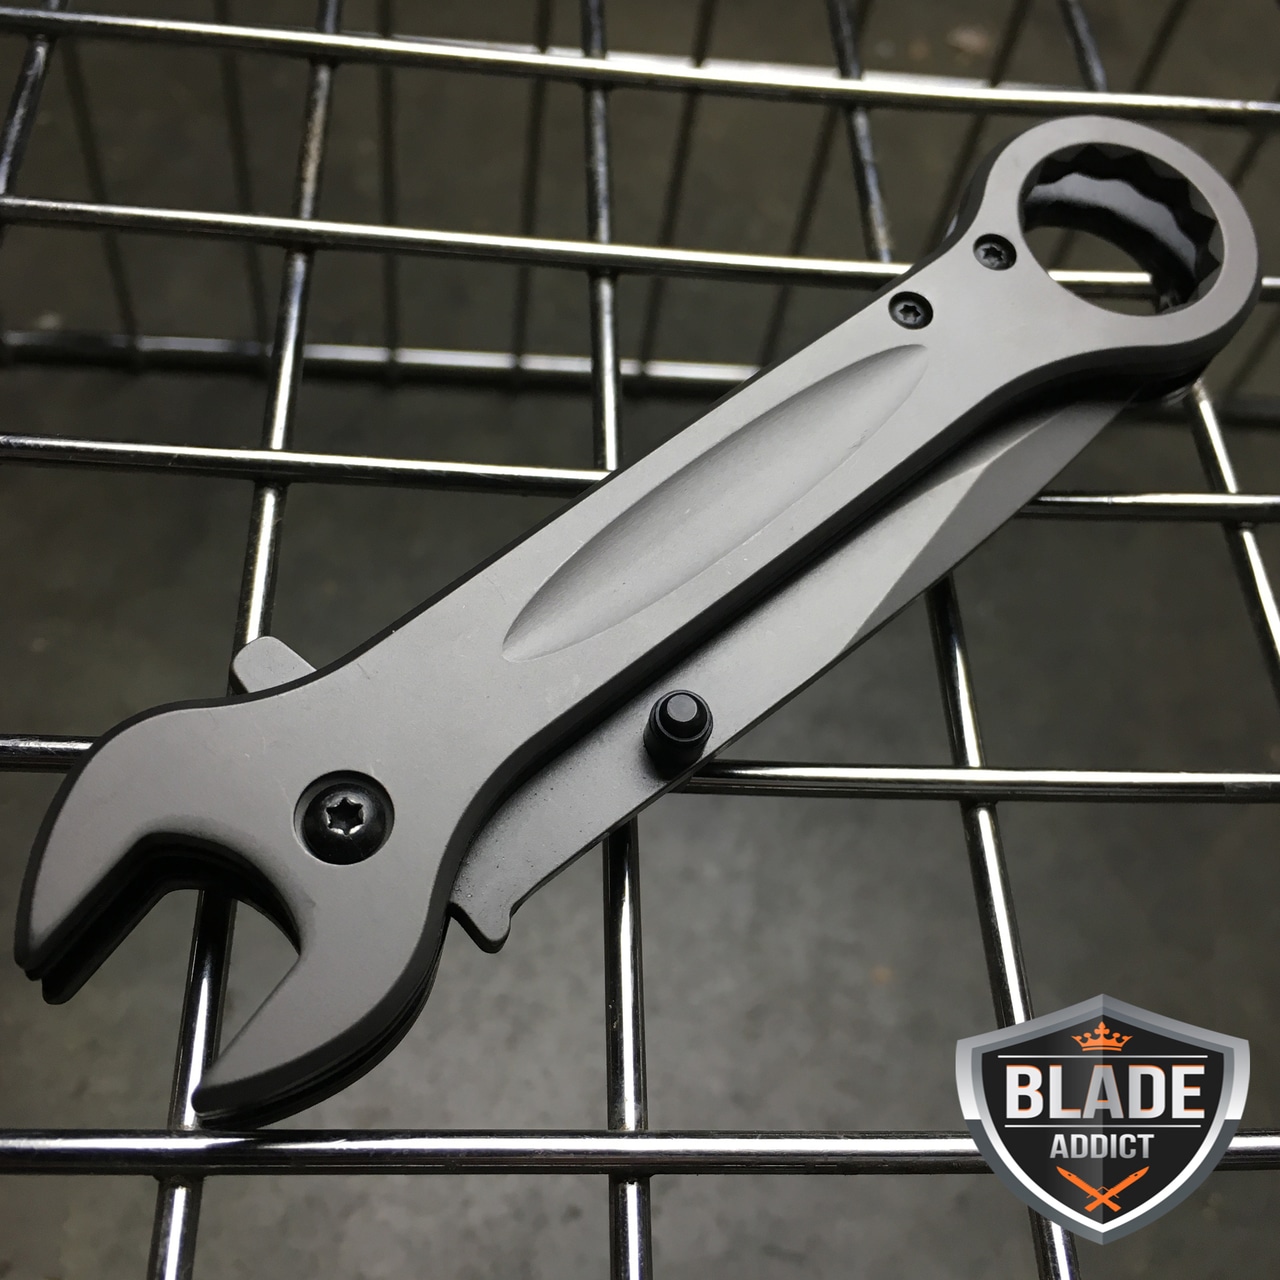 7.5" MULTI-TOOL WRENCH TACTICAL SPRING ASSISTED OPEN FOLDING POCKET KNIFE NEW